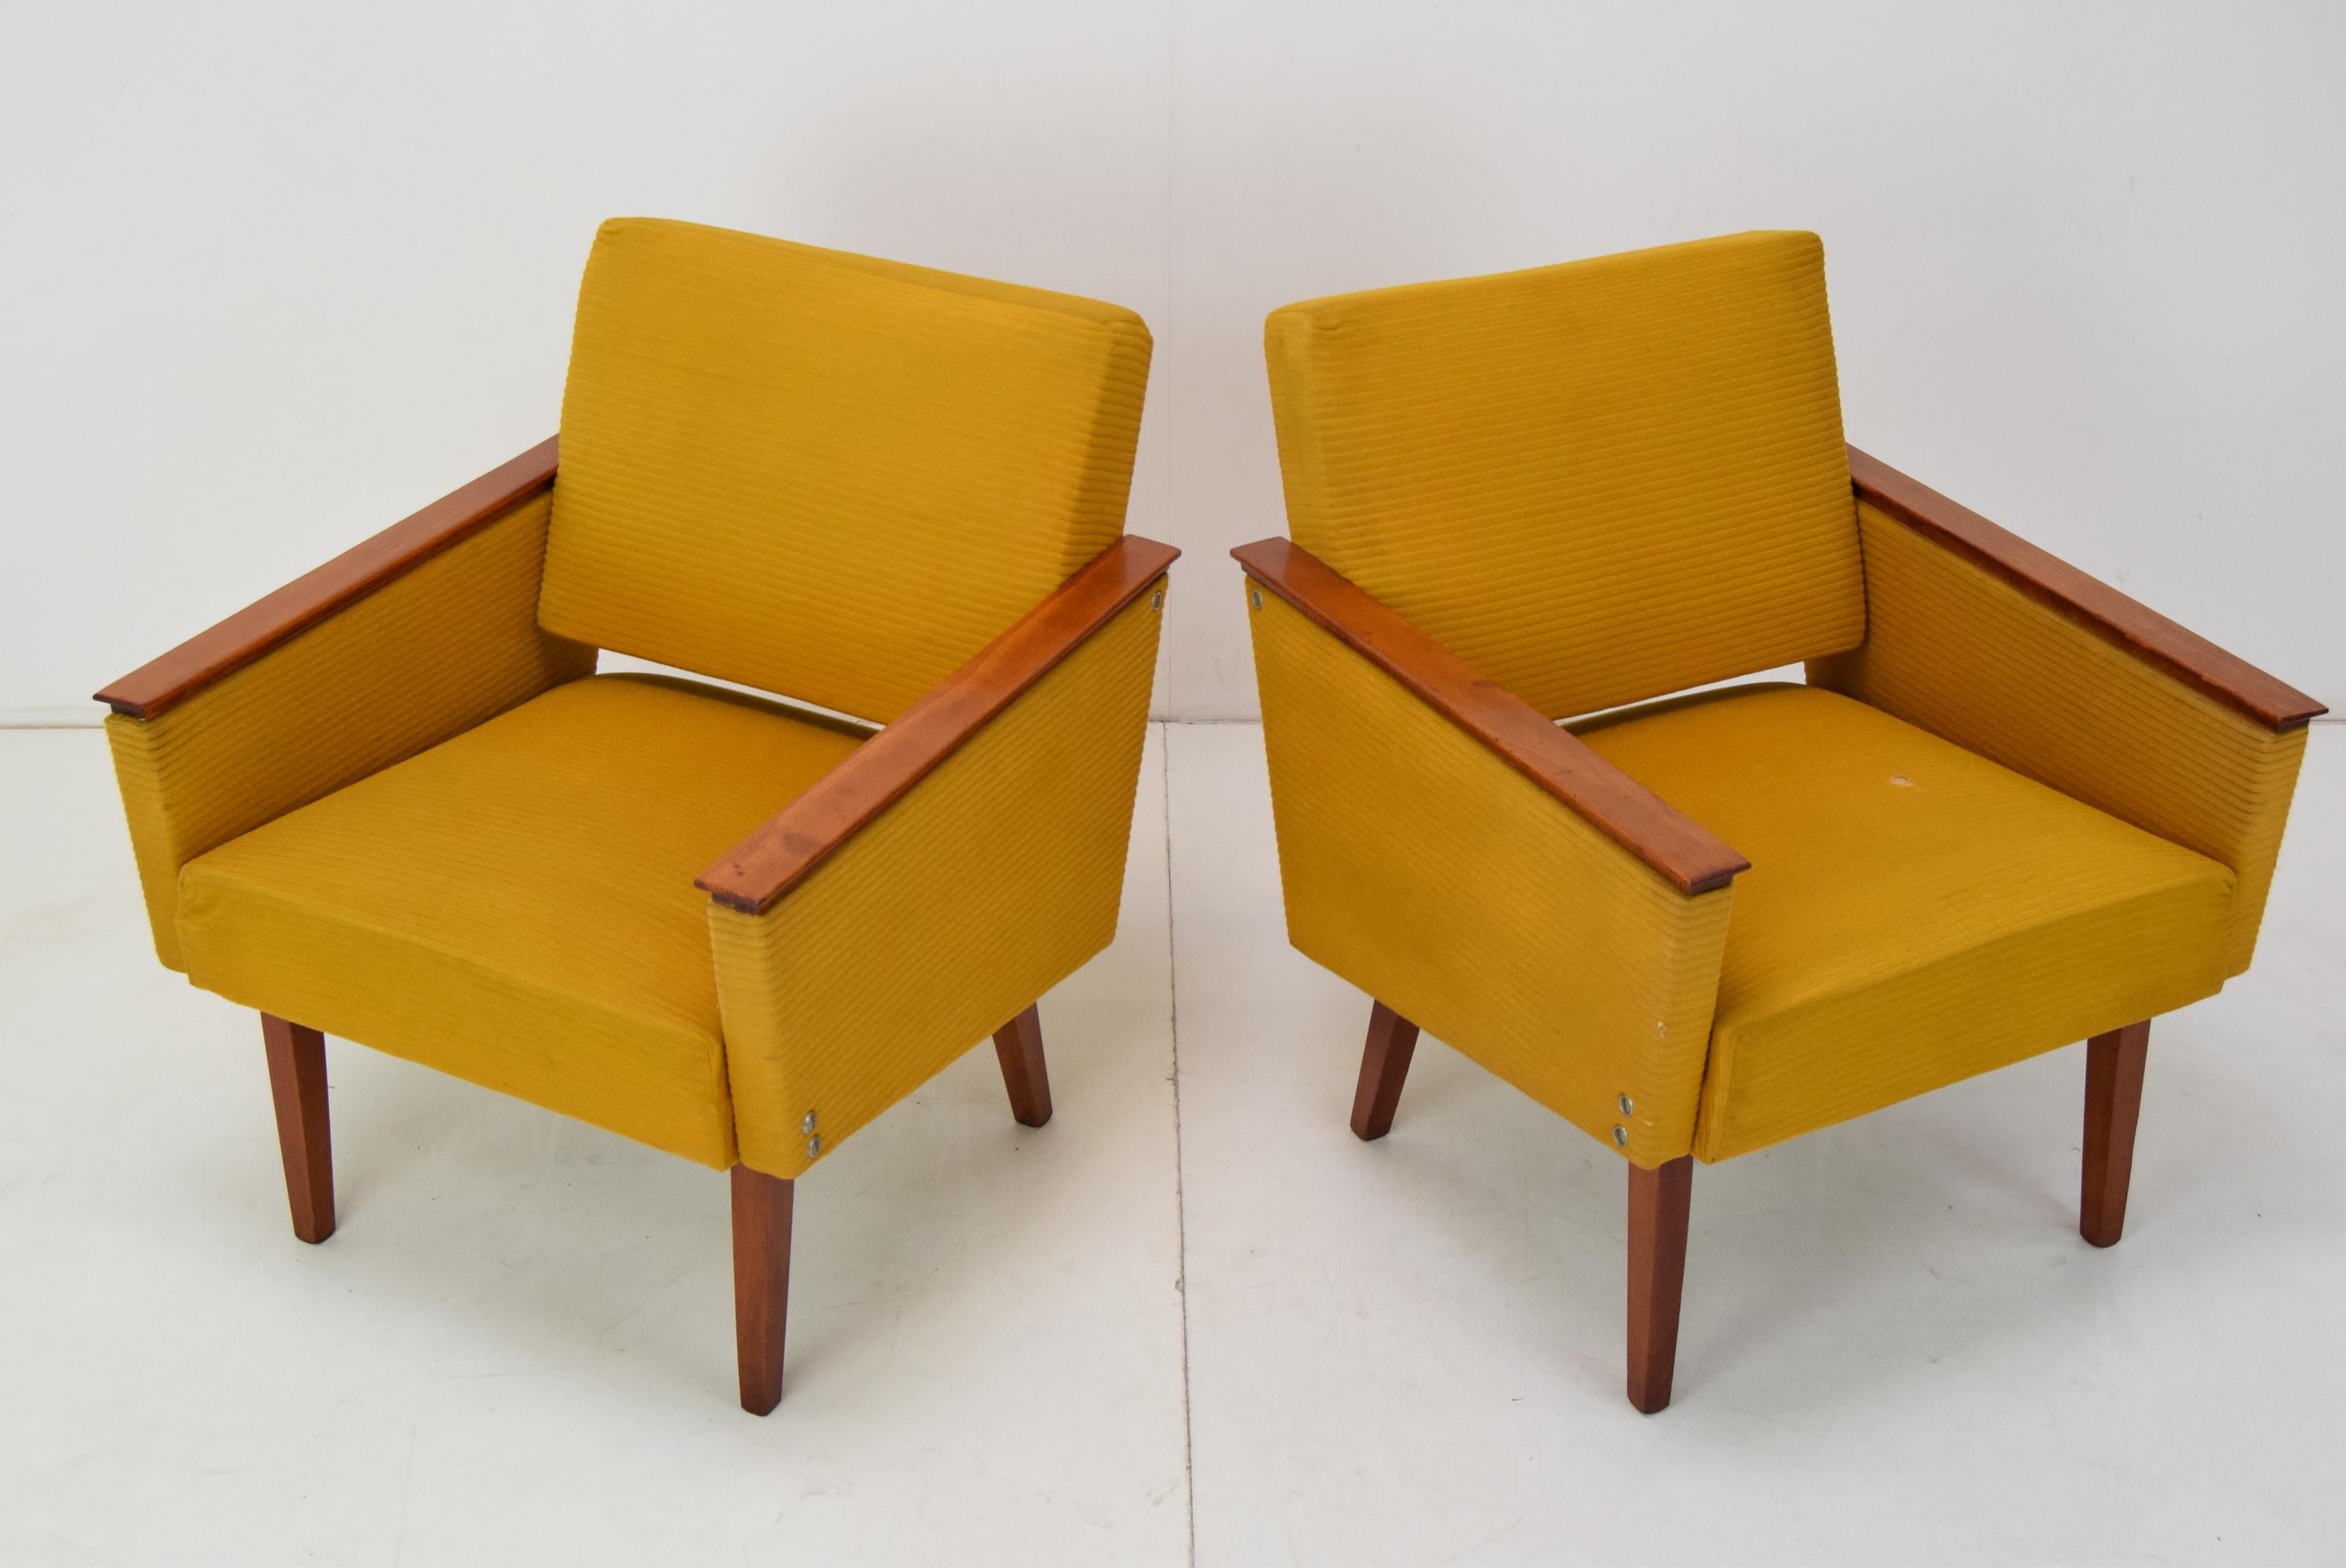 Made of Fabric,Wood
The fabric is suitable for upholstery
Original condition
Seat height 39cm